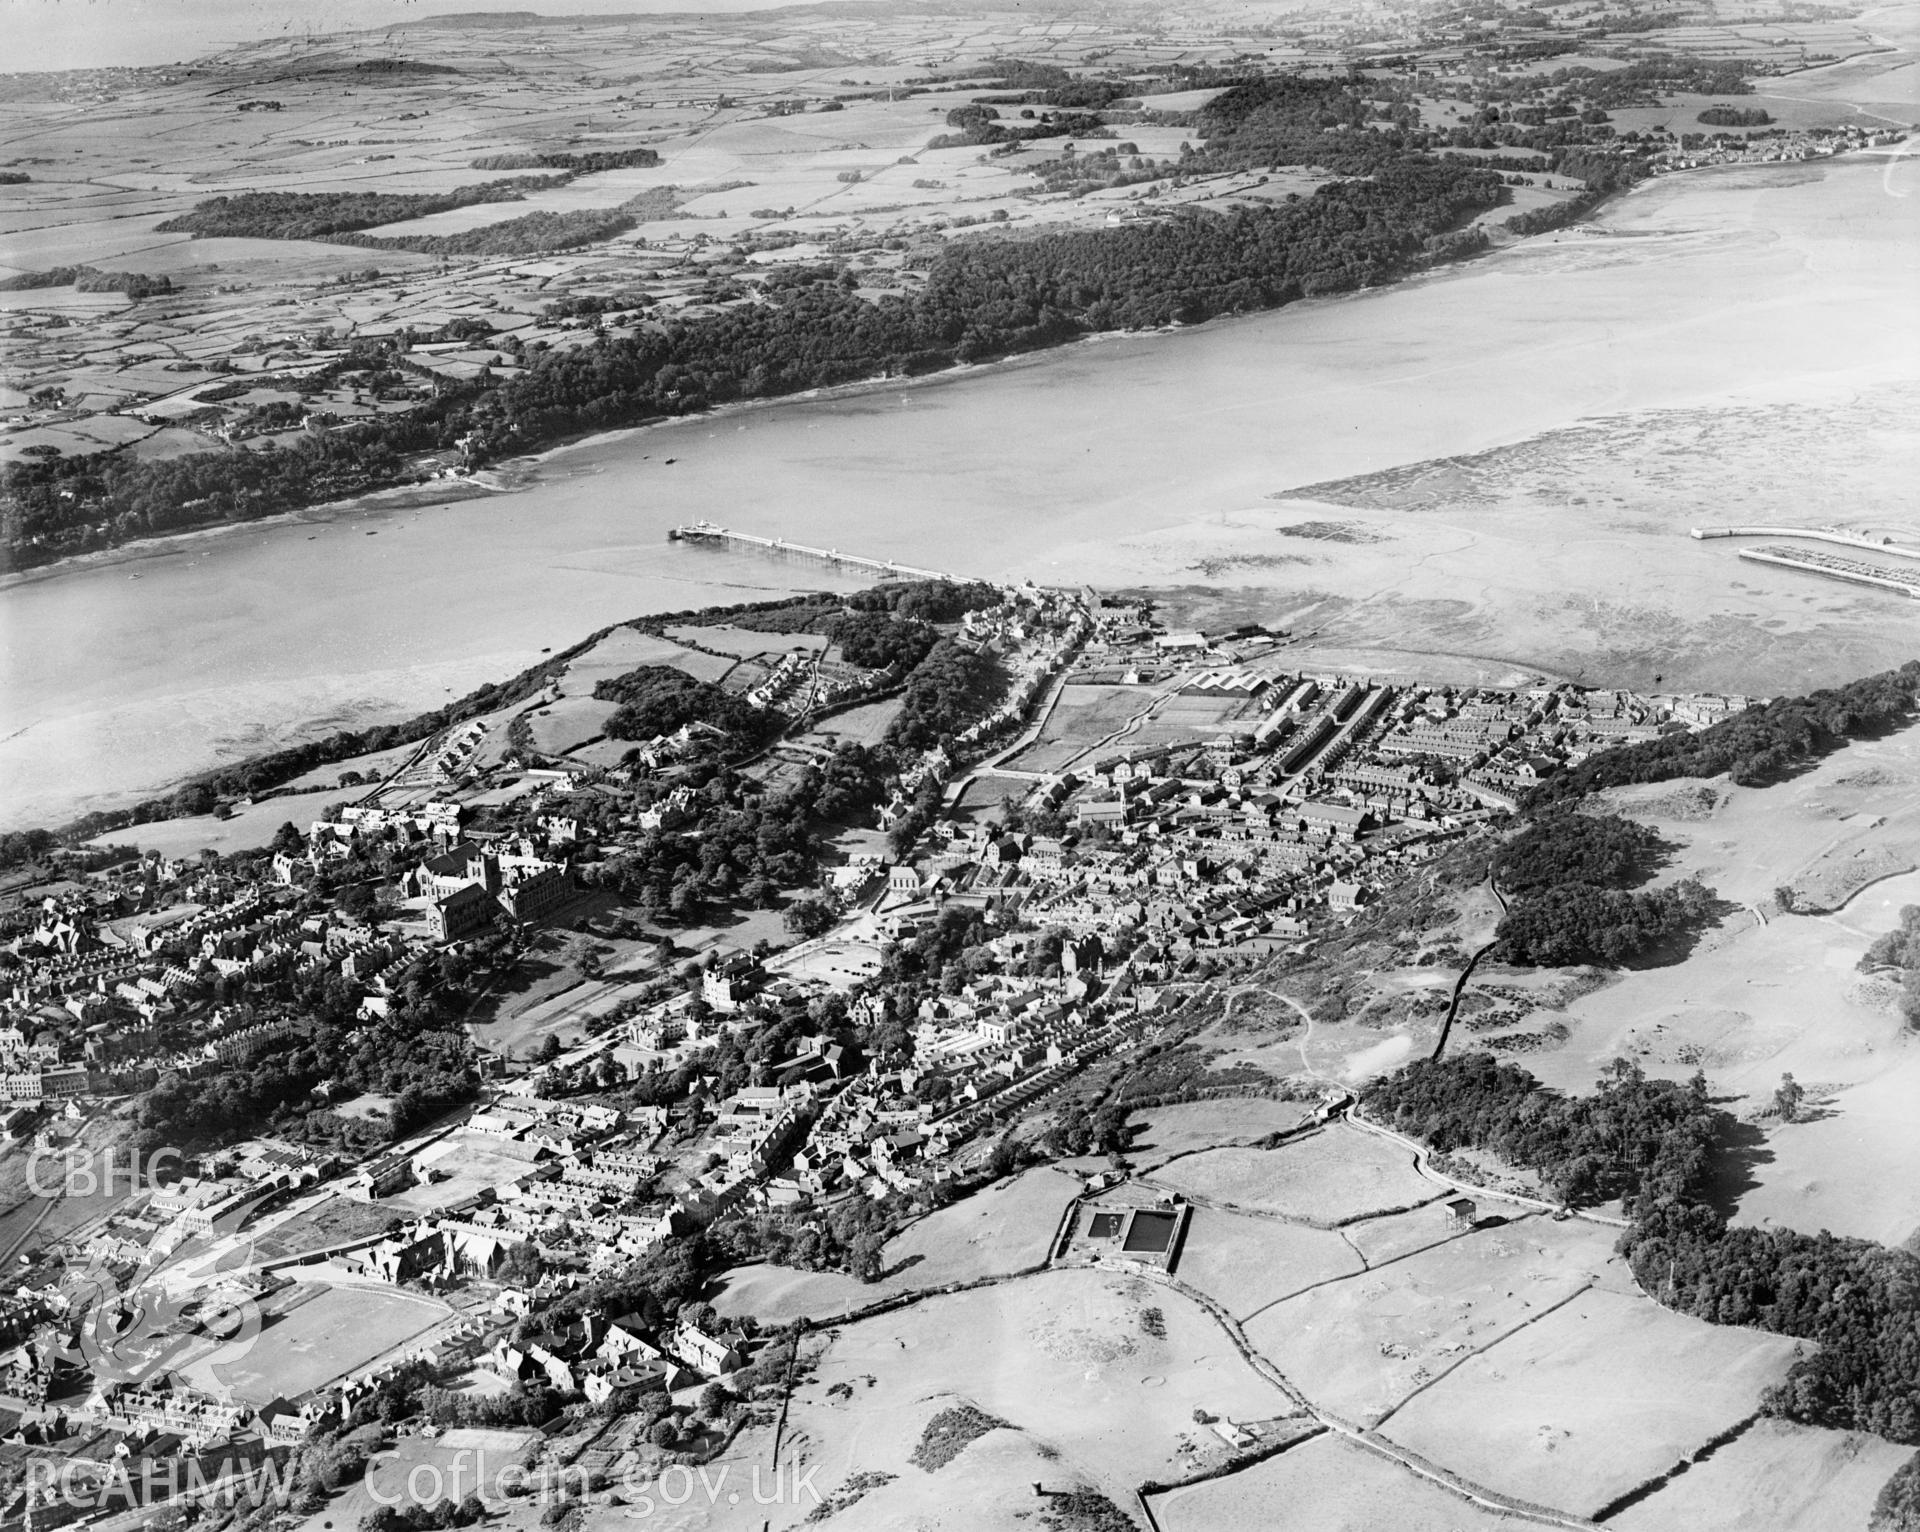 View of Bangor, oblique aerial view. 5?x4? black and white glass plate negative.